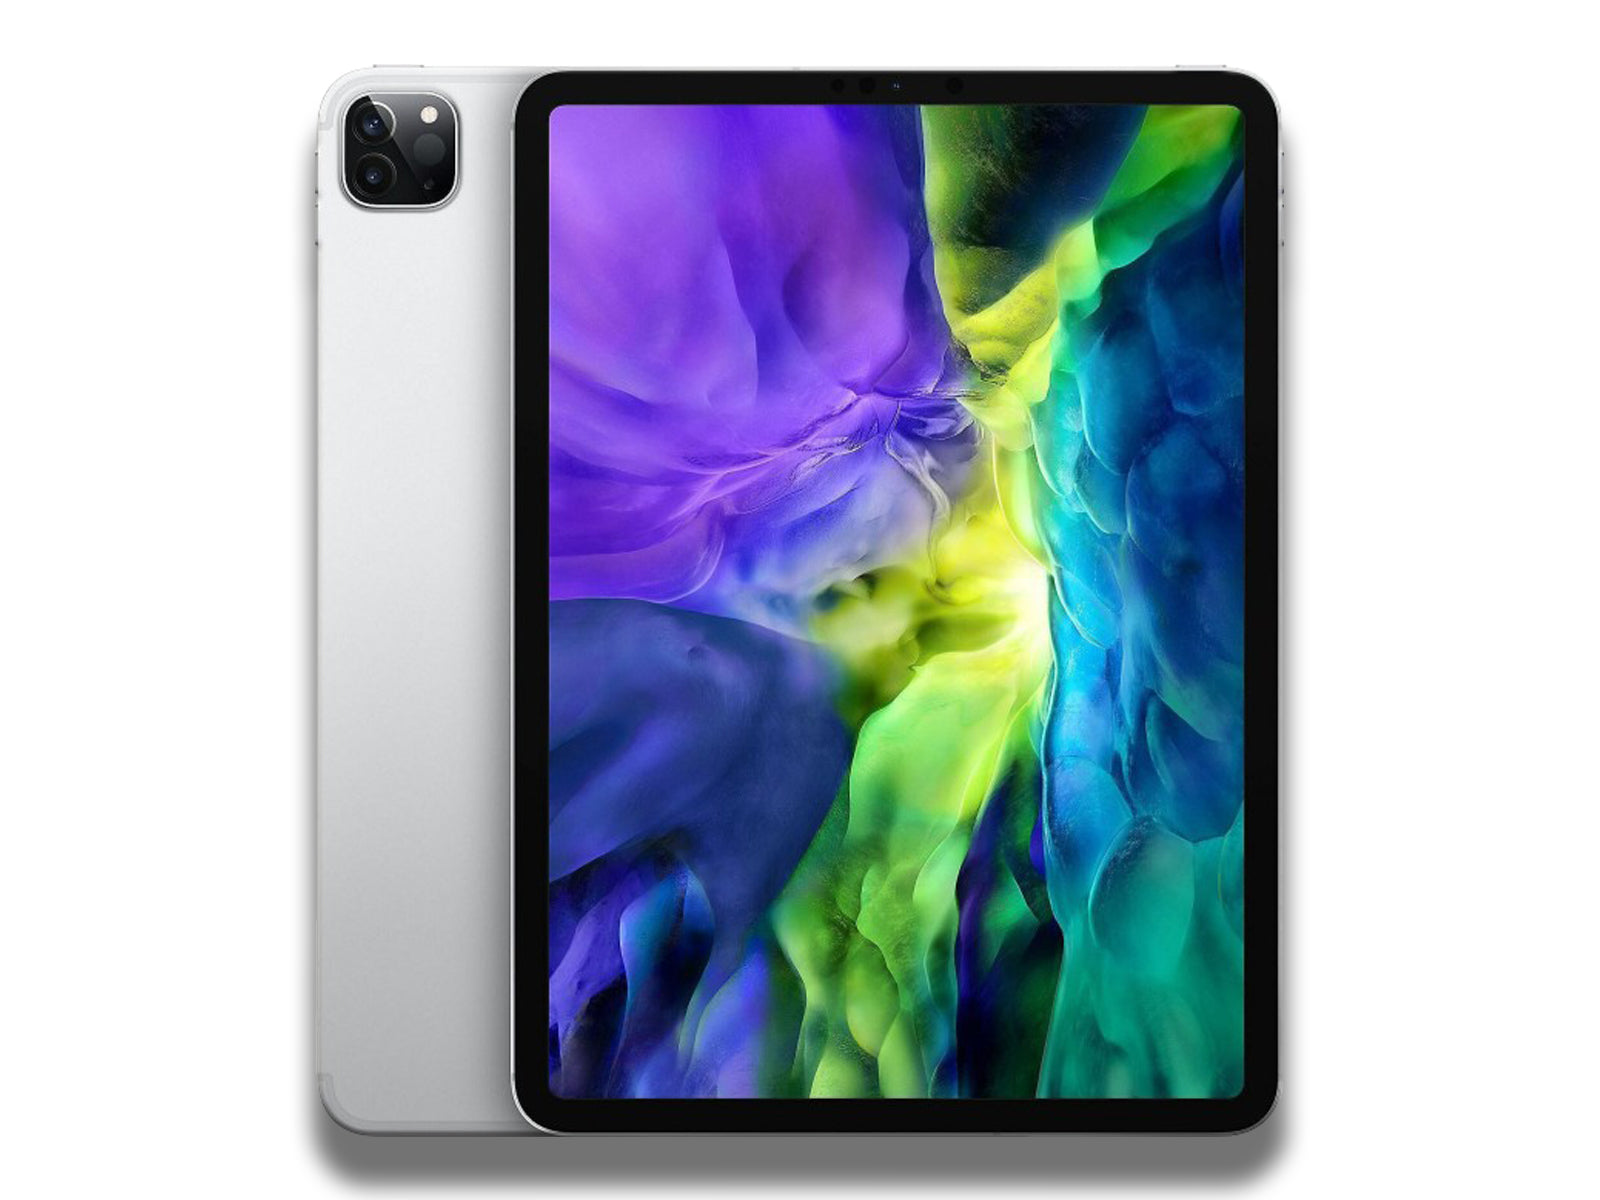 Image shows the silver Apple iPad Pro 11-inch 2nd Generation